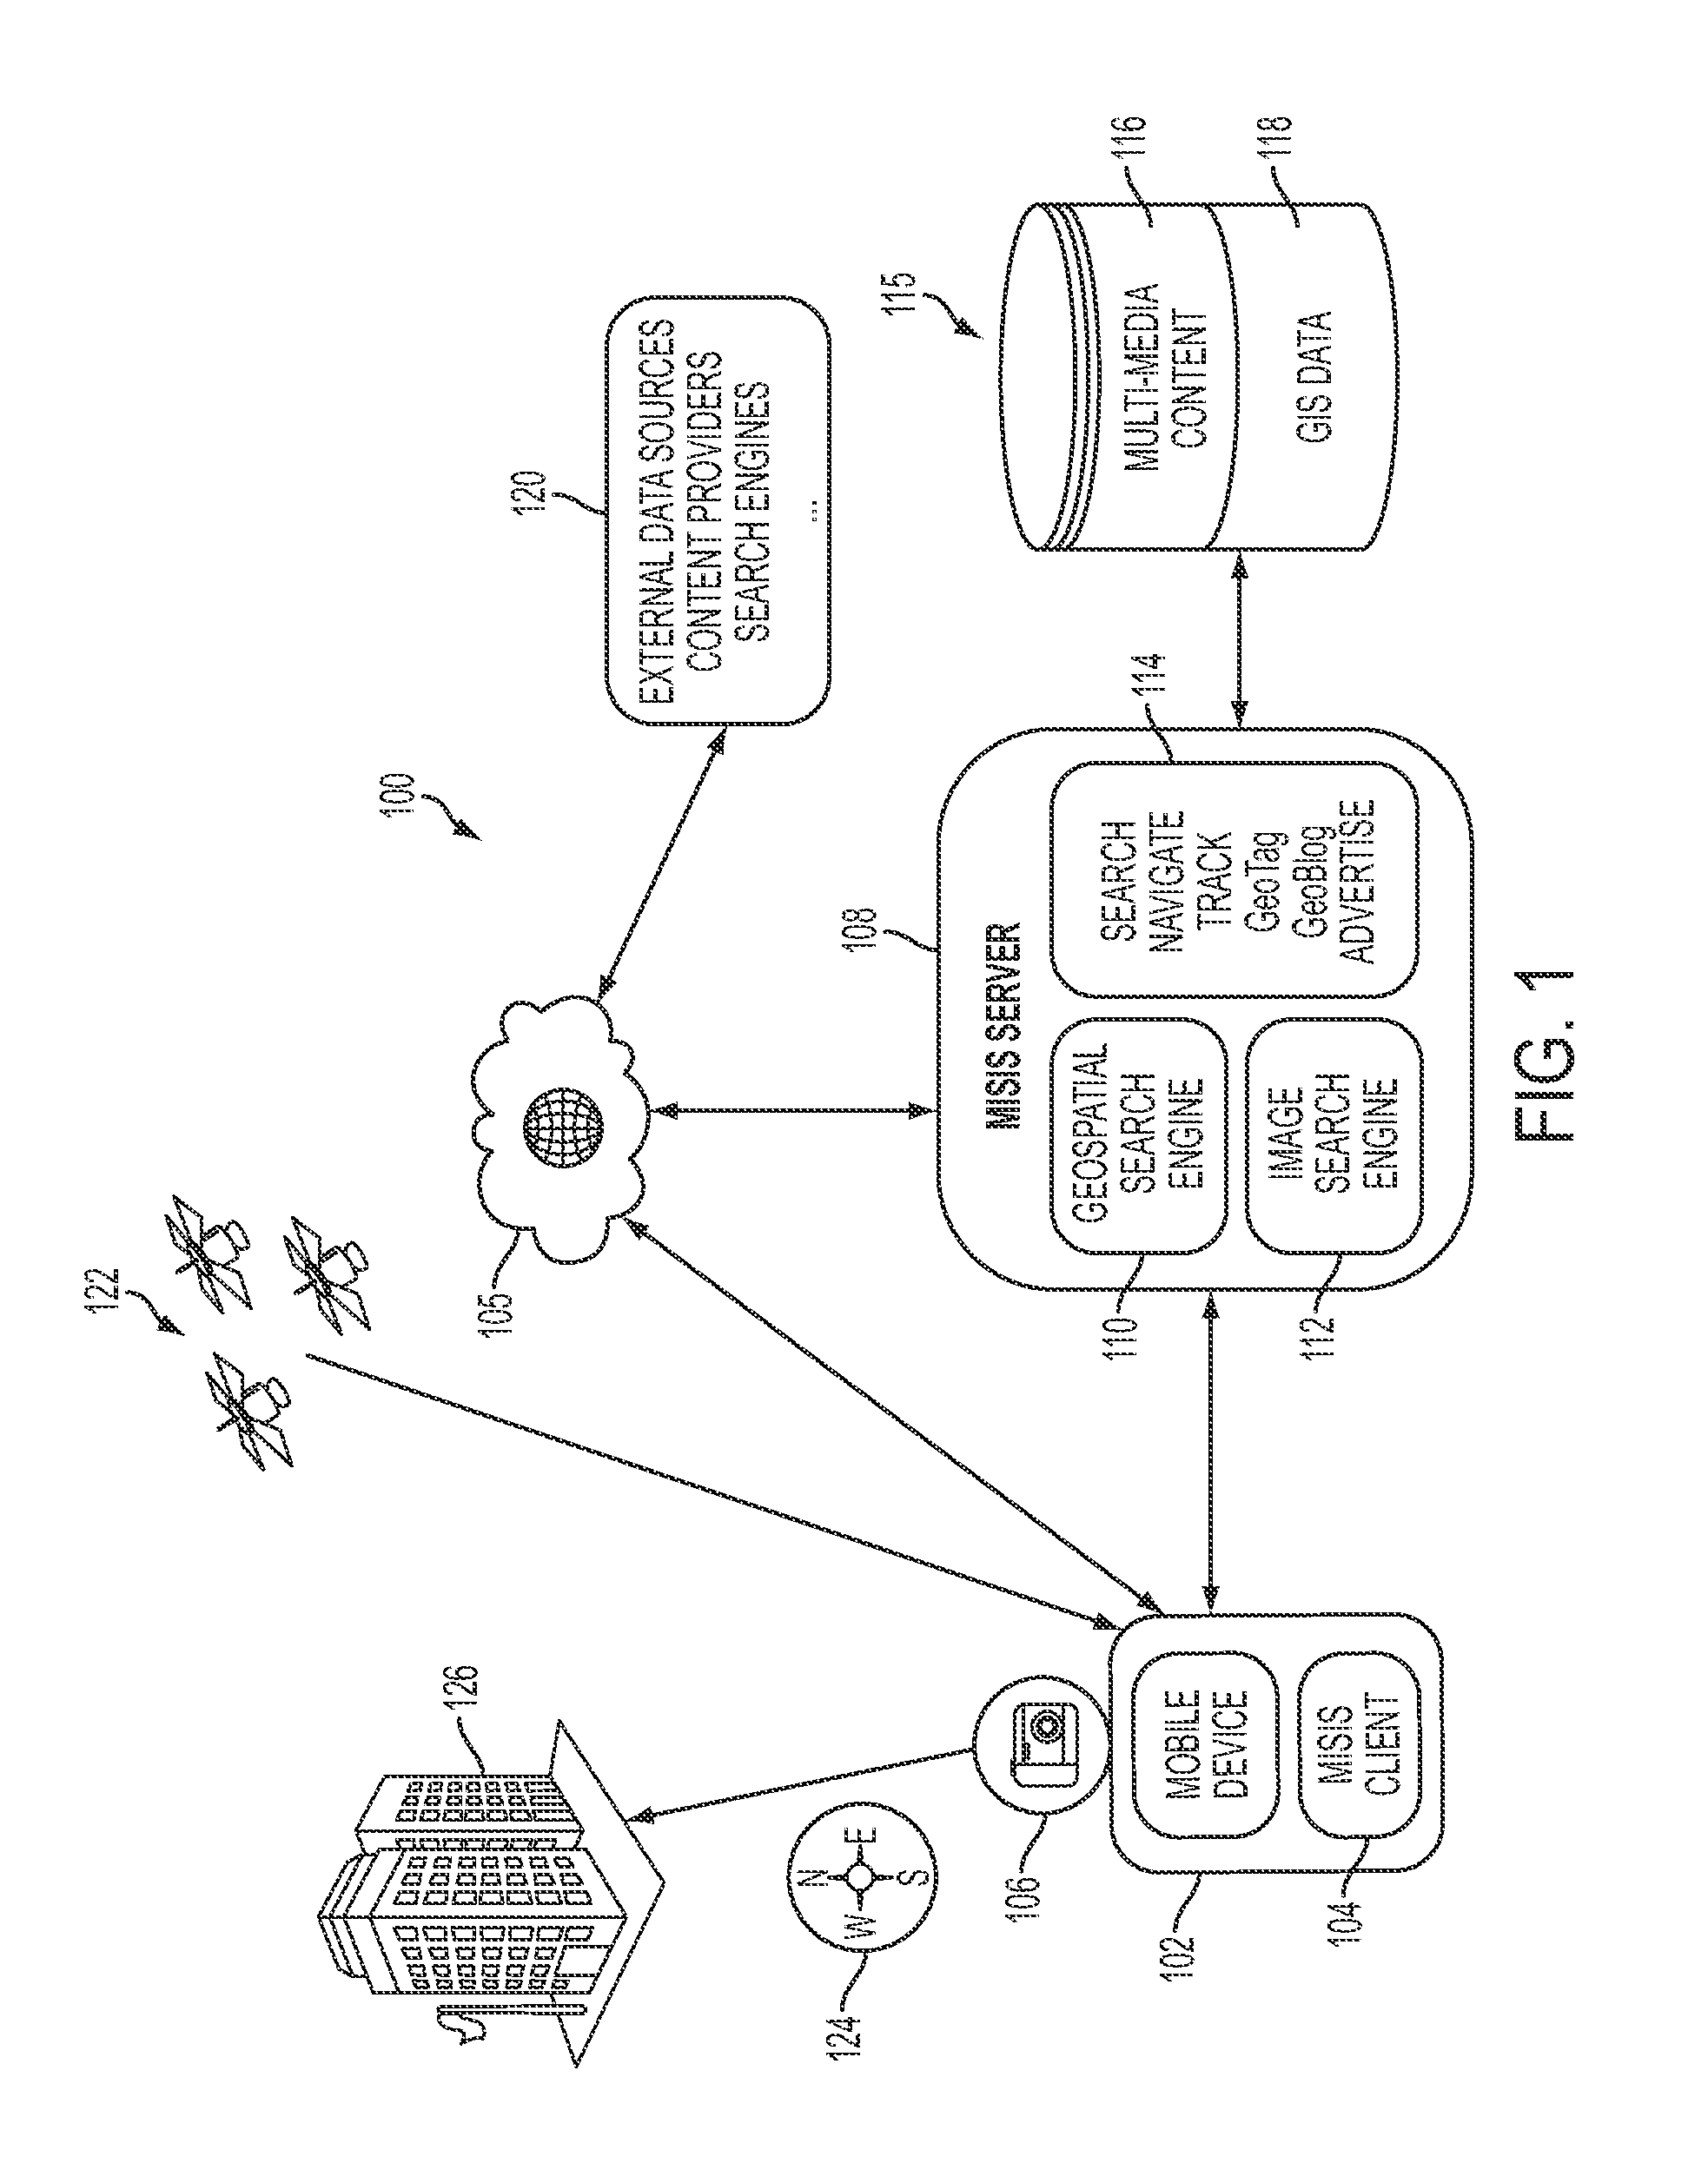 Mobile Image Search and Indexing System and Method